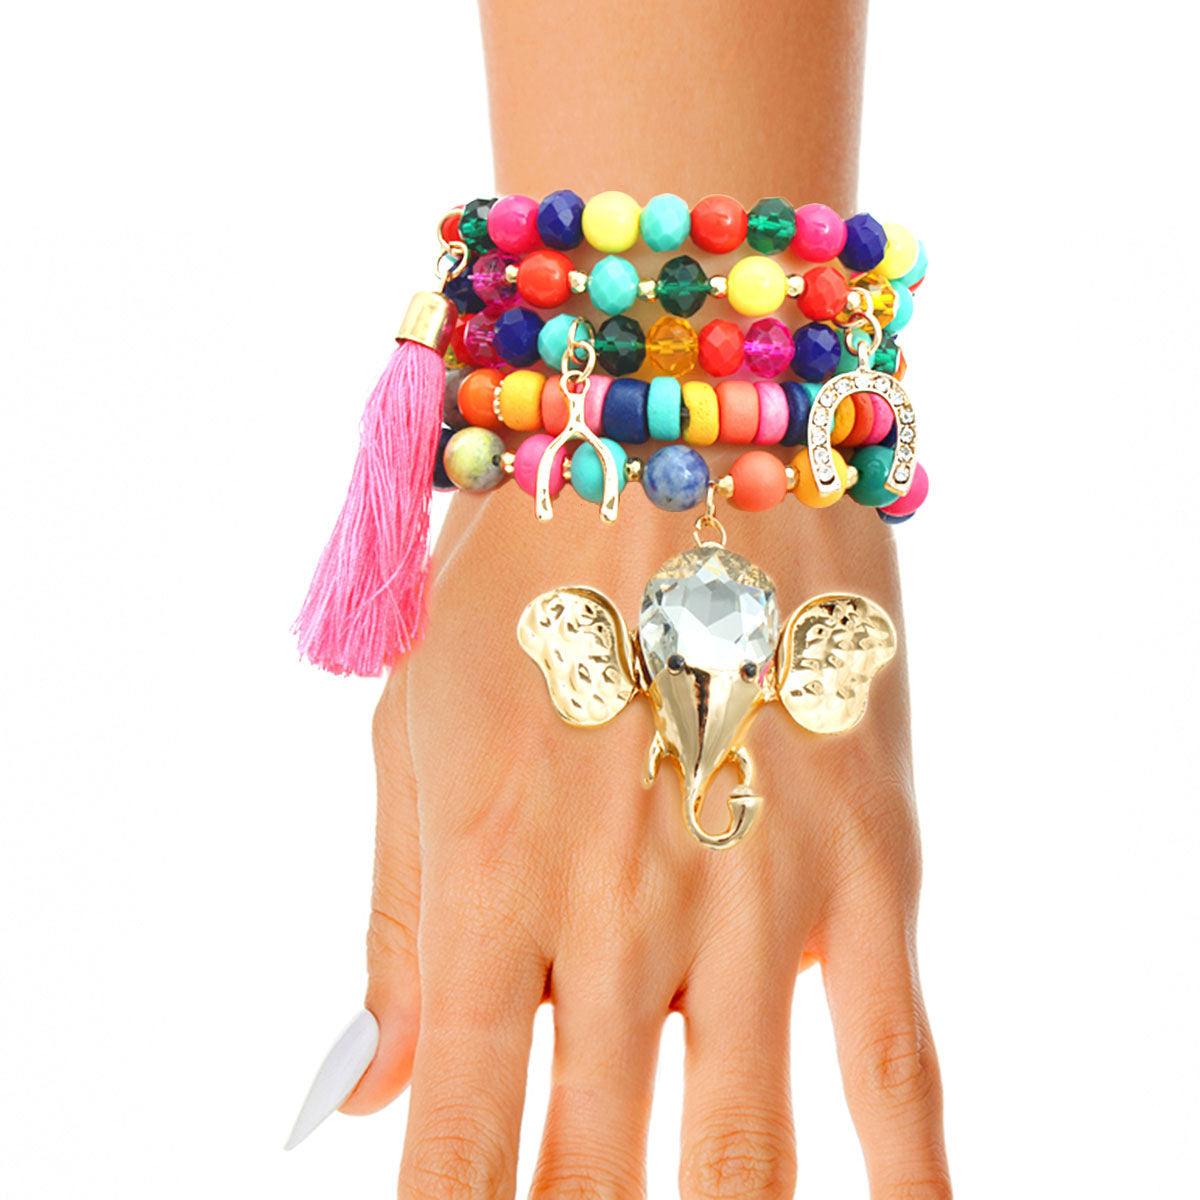 Beaded Bracelets: Fashion's Charming Over the Rainbow Statement